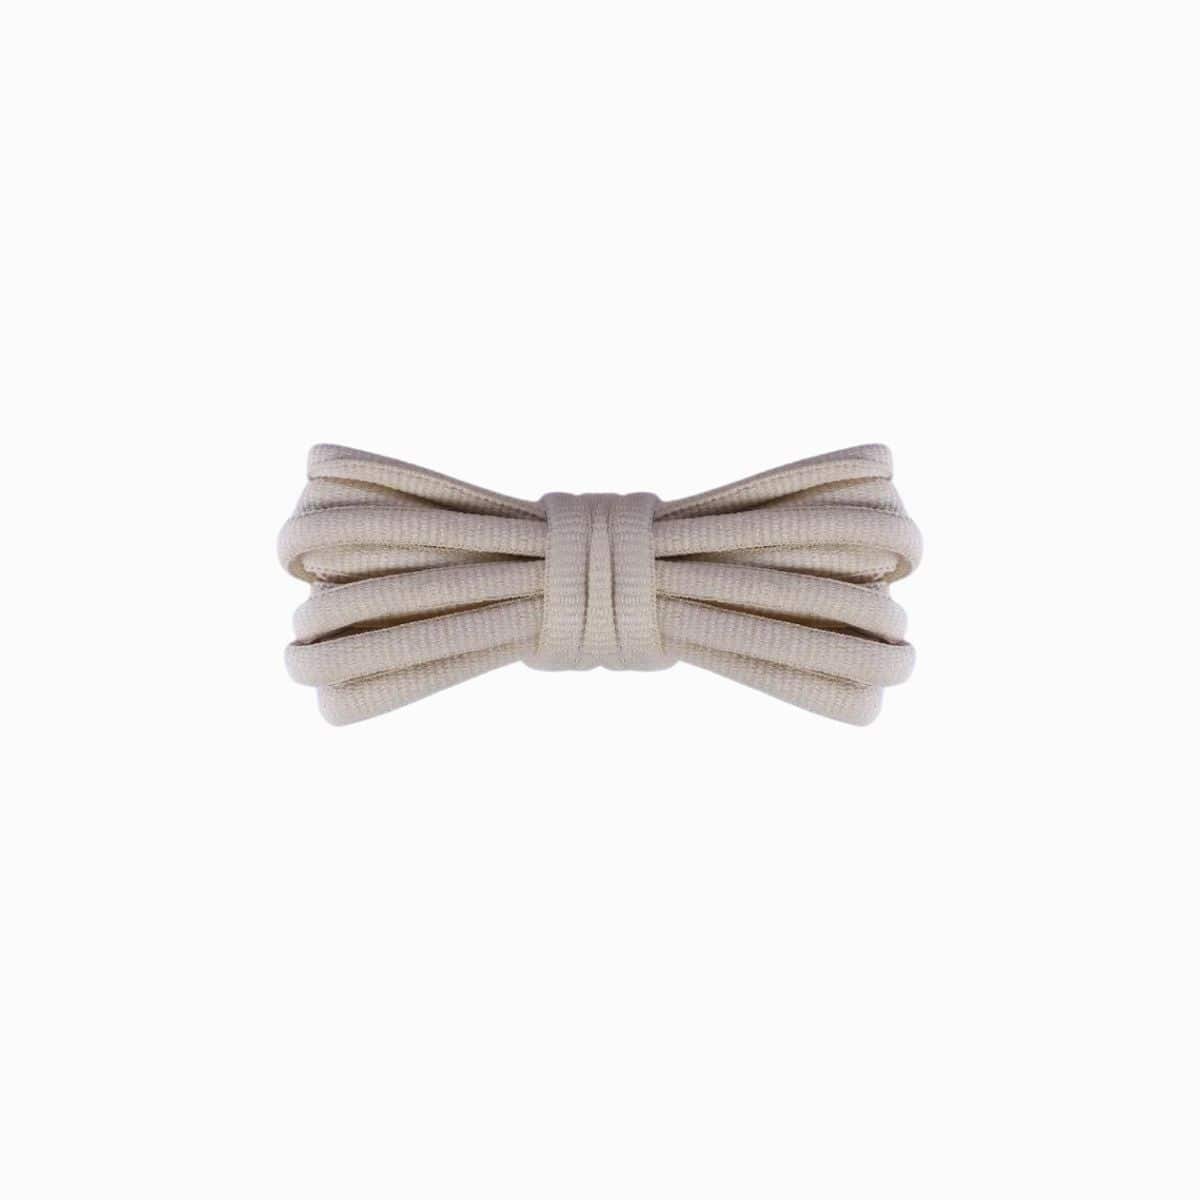 Nike_TN_Replacement_Shoelaces_Beige